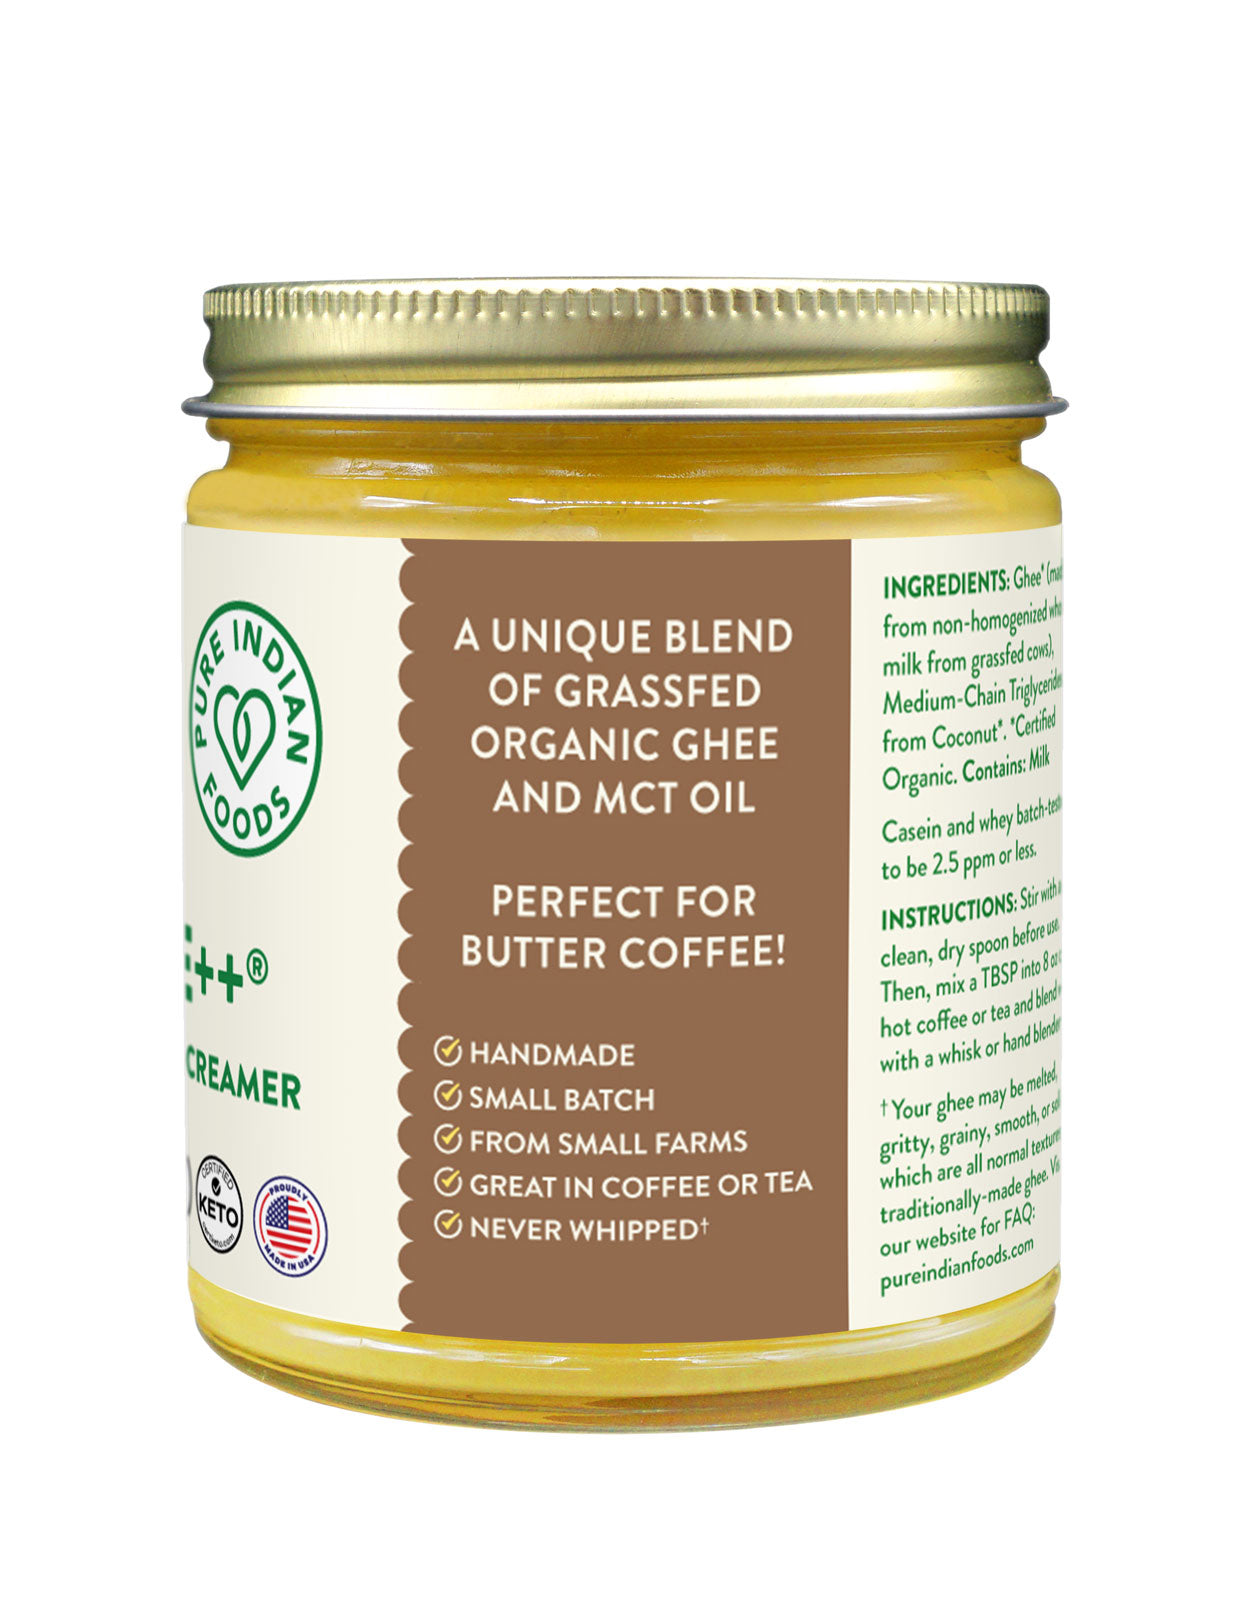 Side label on a jar of Coffee++ Butter Coffee Creamer. It says it is A unique blend of Grassfed Organic ghee and MCT oil. Perfect for butter coffee! Handmade. Small batch. From Small Farms. Great in Coffee or Tea. Never whipped!